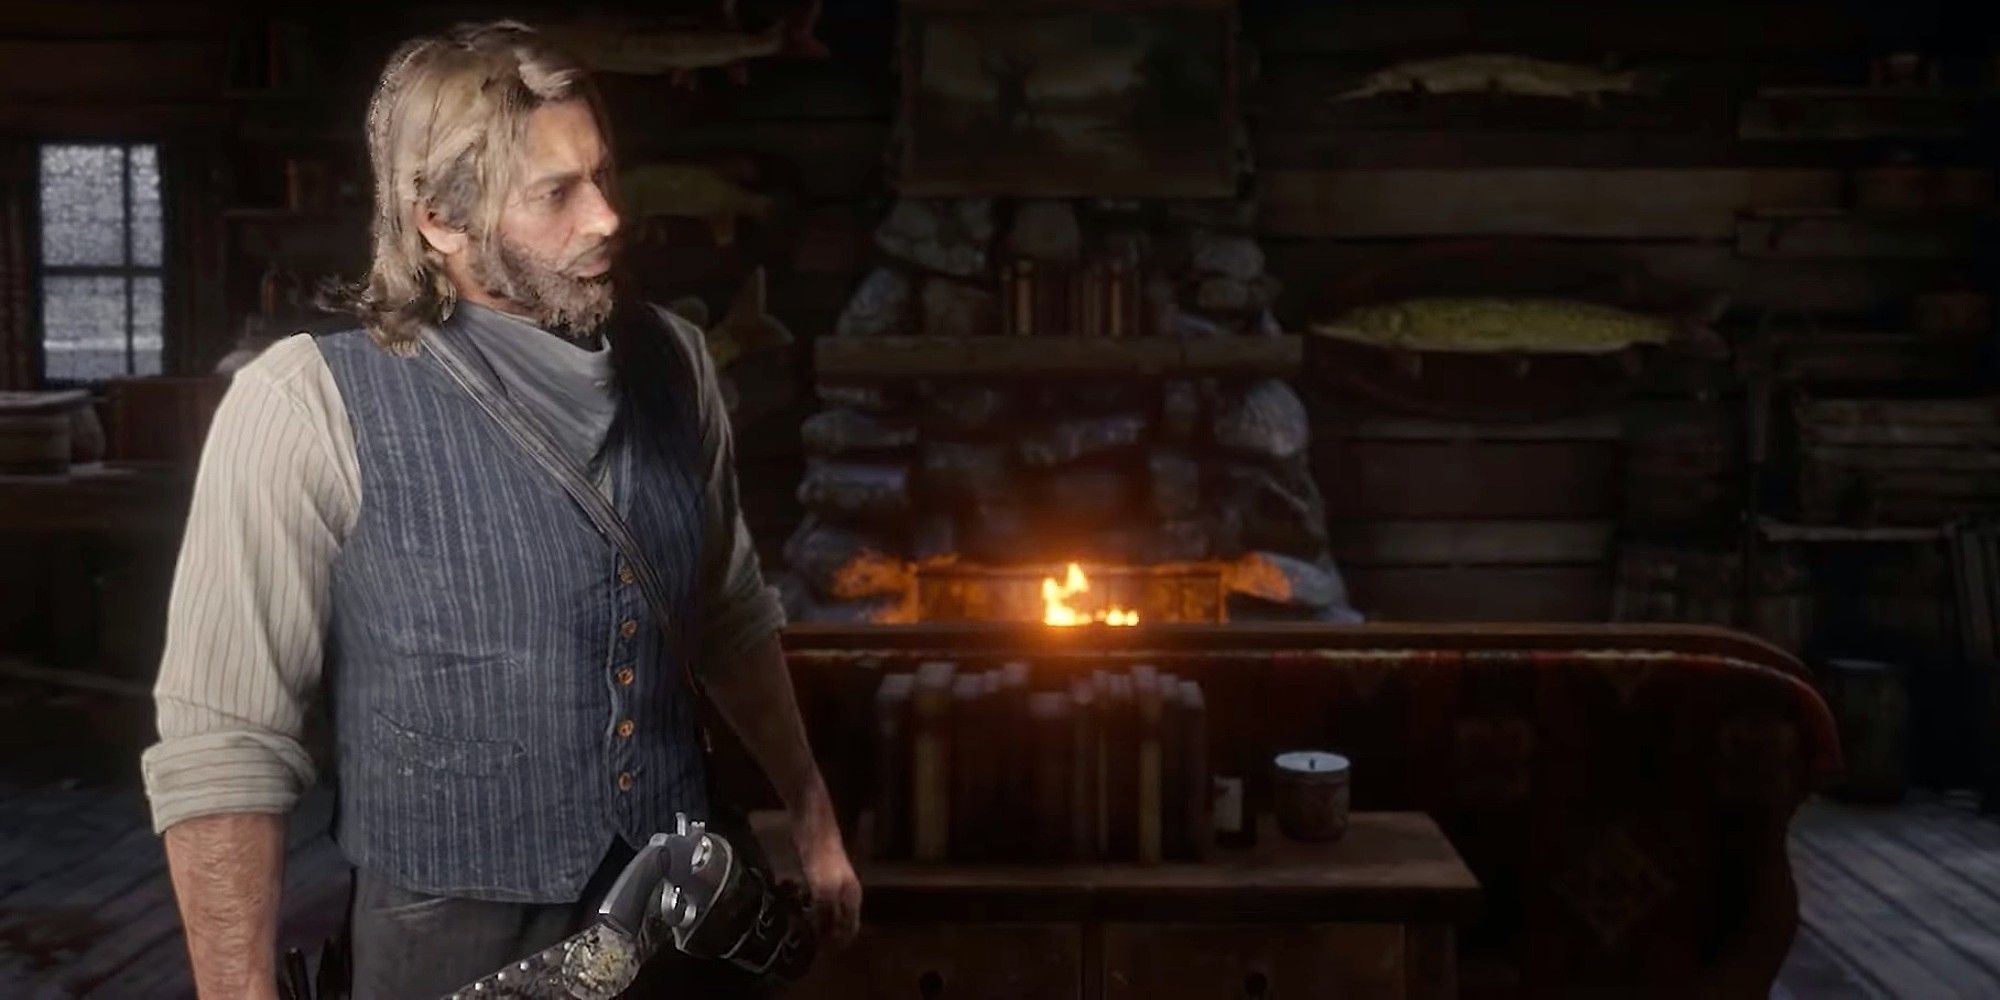 Unused Red Dead Redemption 2 Cutscene Suggests The Game Was Going To Be Even Bigger